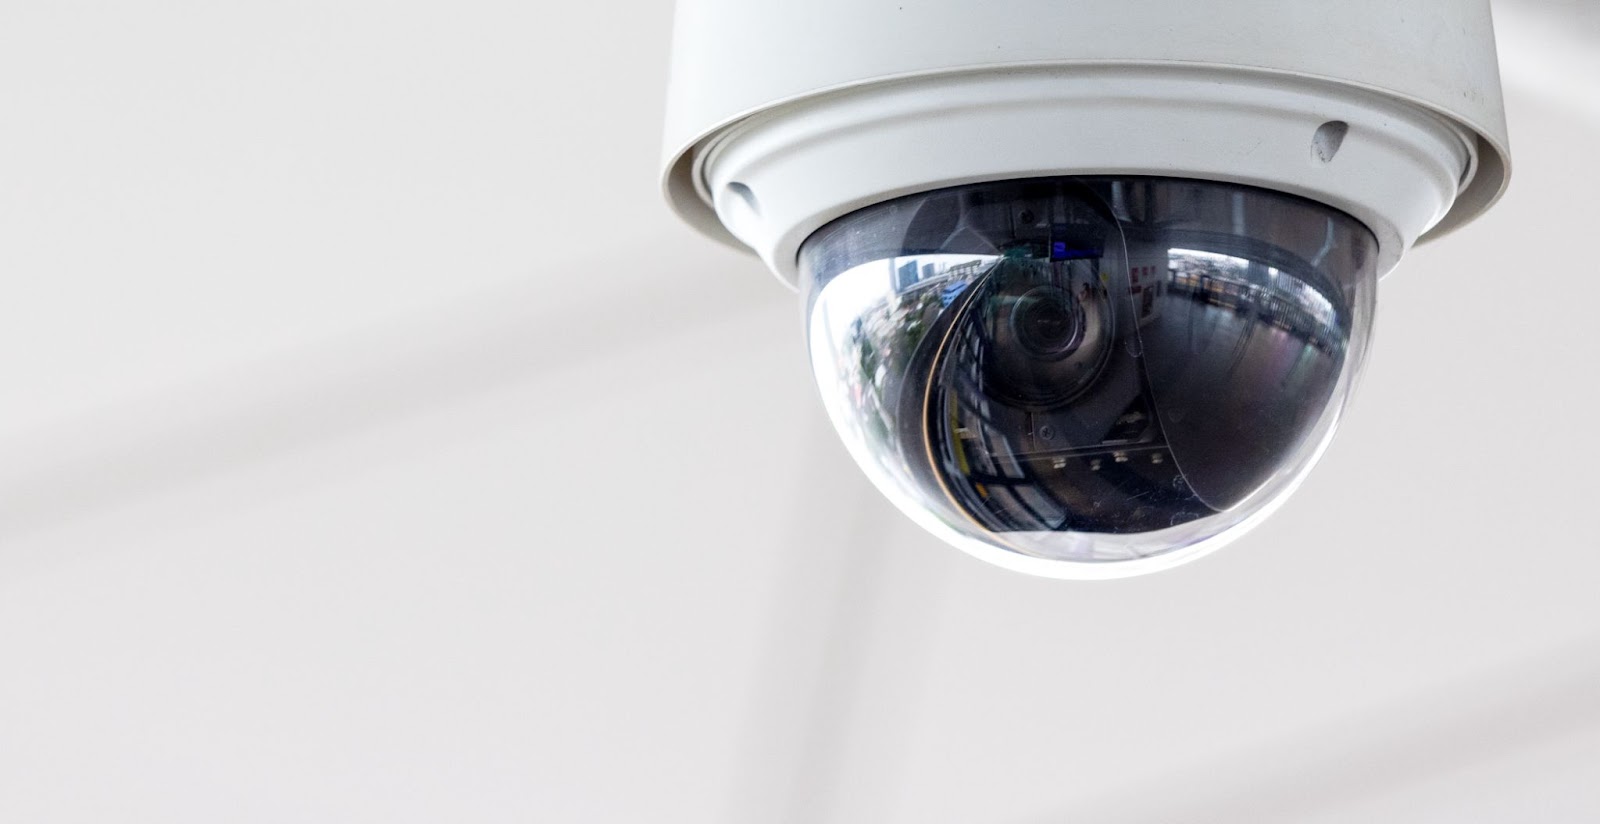 Types of CCTV Cameras // The different types of CCTV explained